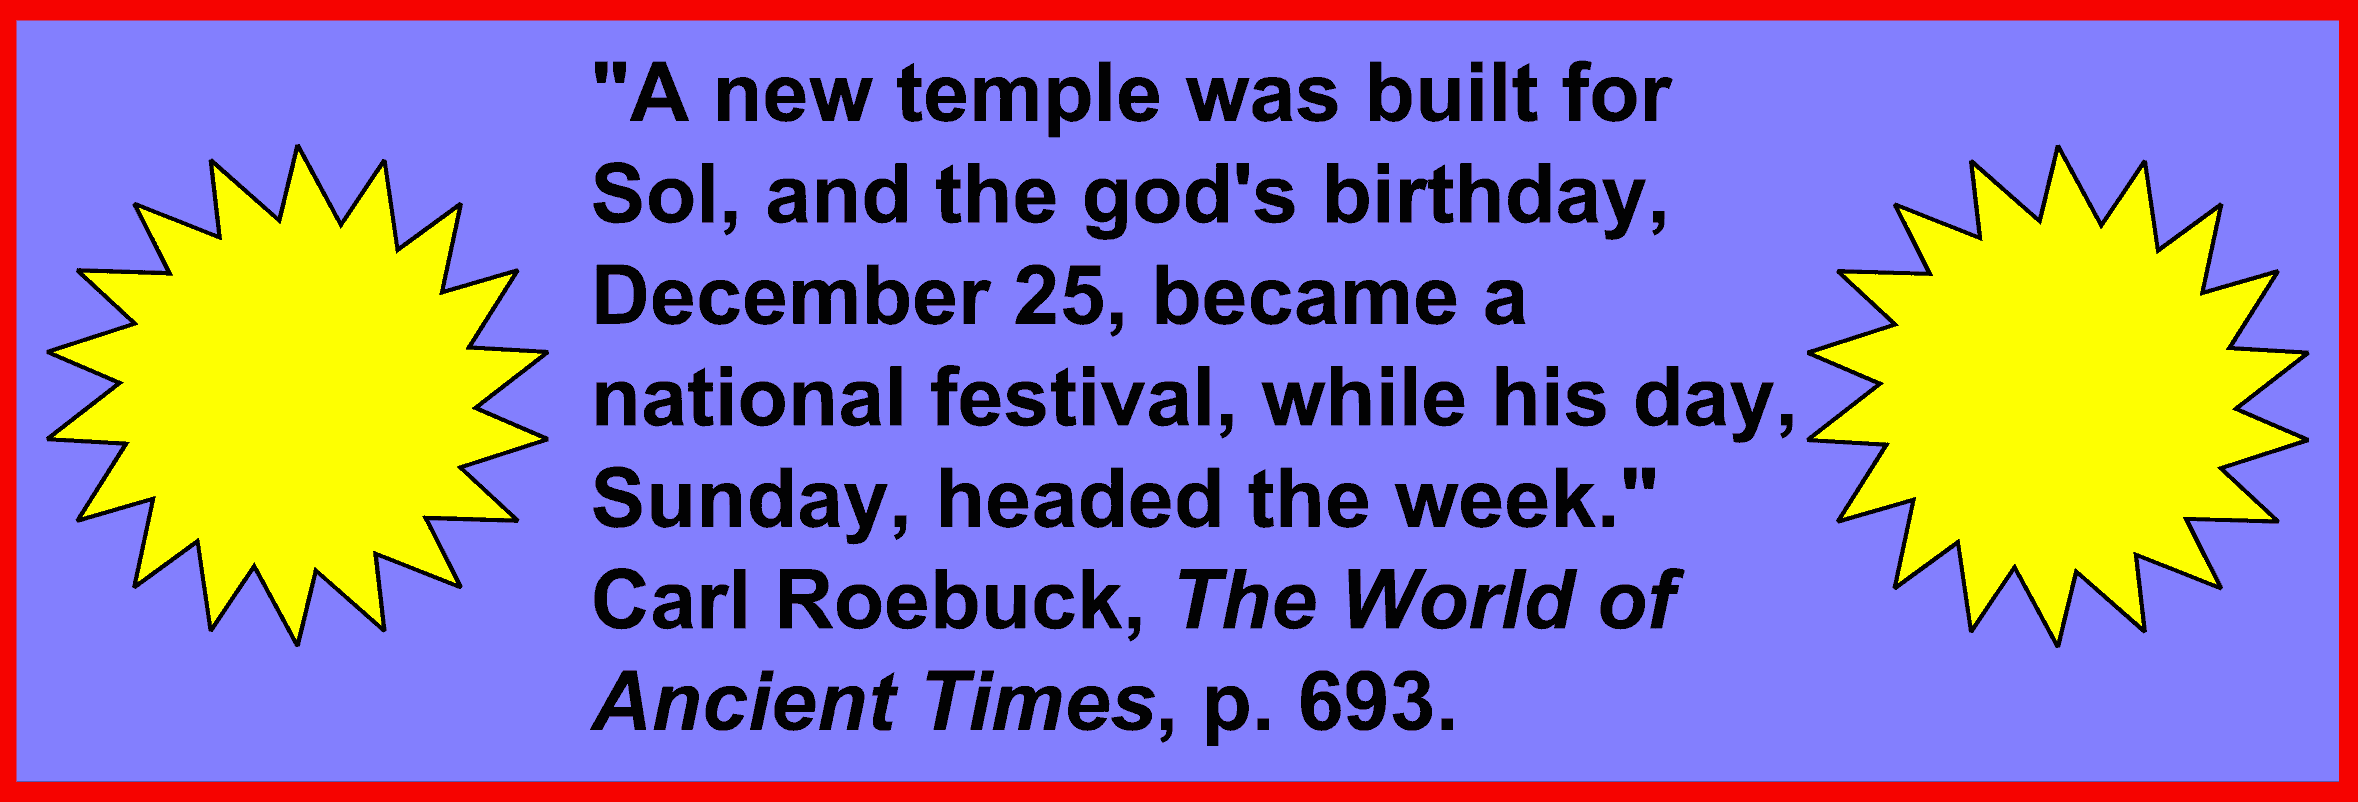 Image:"A new temple was built for Sol, and the god's birthday, December 25, 
became a national festival, while his day, Sunday, headed the week." Carl Roebuck, The World of Ancient Times, p.  693.